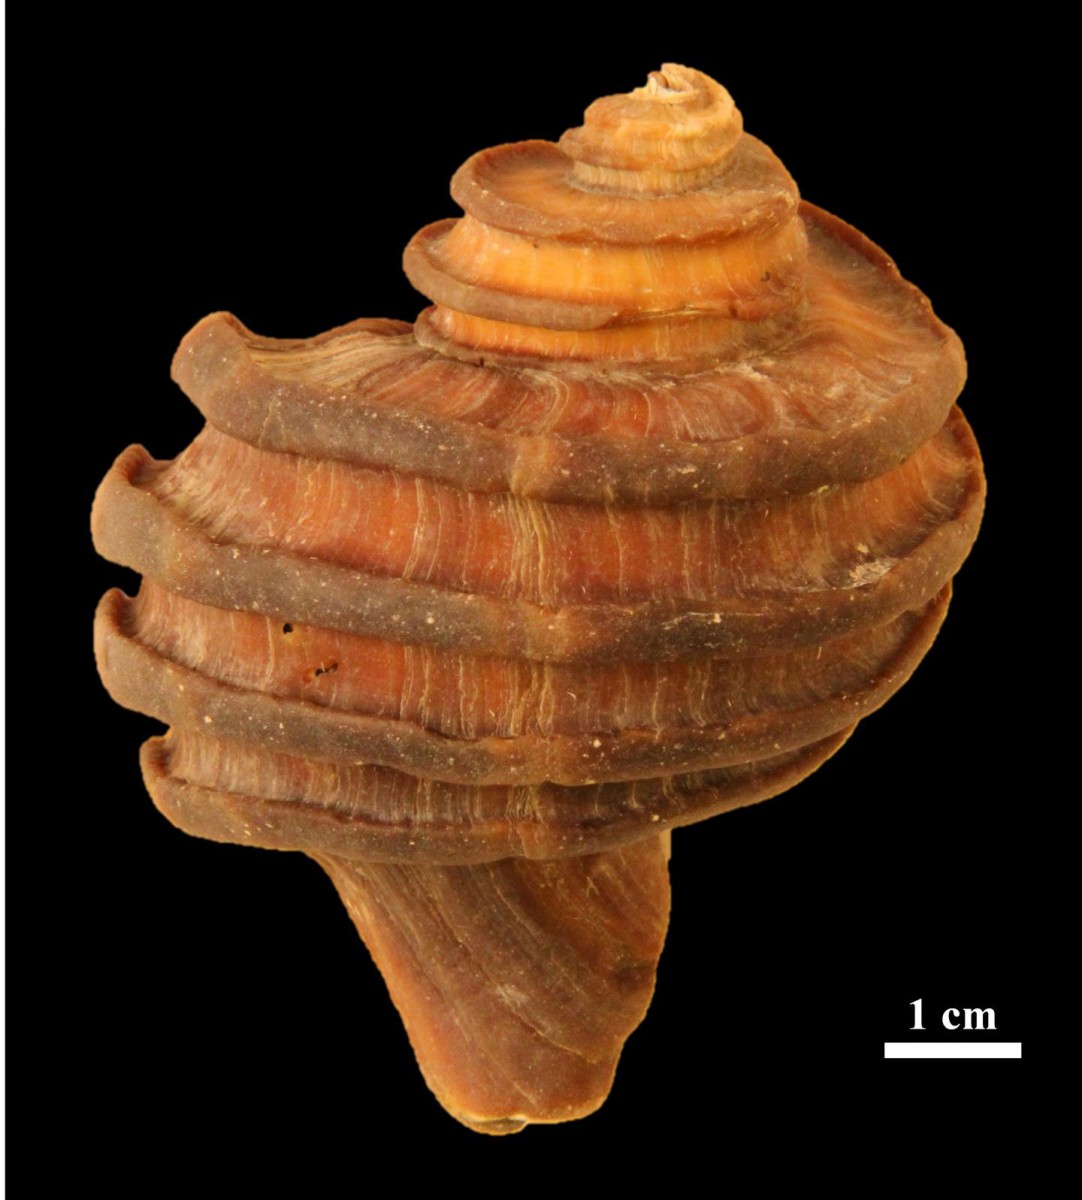 A 15-million year old fossil gastropod, Ecphora, from the Calvert Cliffs of southern Maryland is depicted. The golden brown color arises from the original shell-binding proteins and pigments preserved in the mineralized shell.
Credit: Picture is provided courtesy of John Nance.